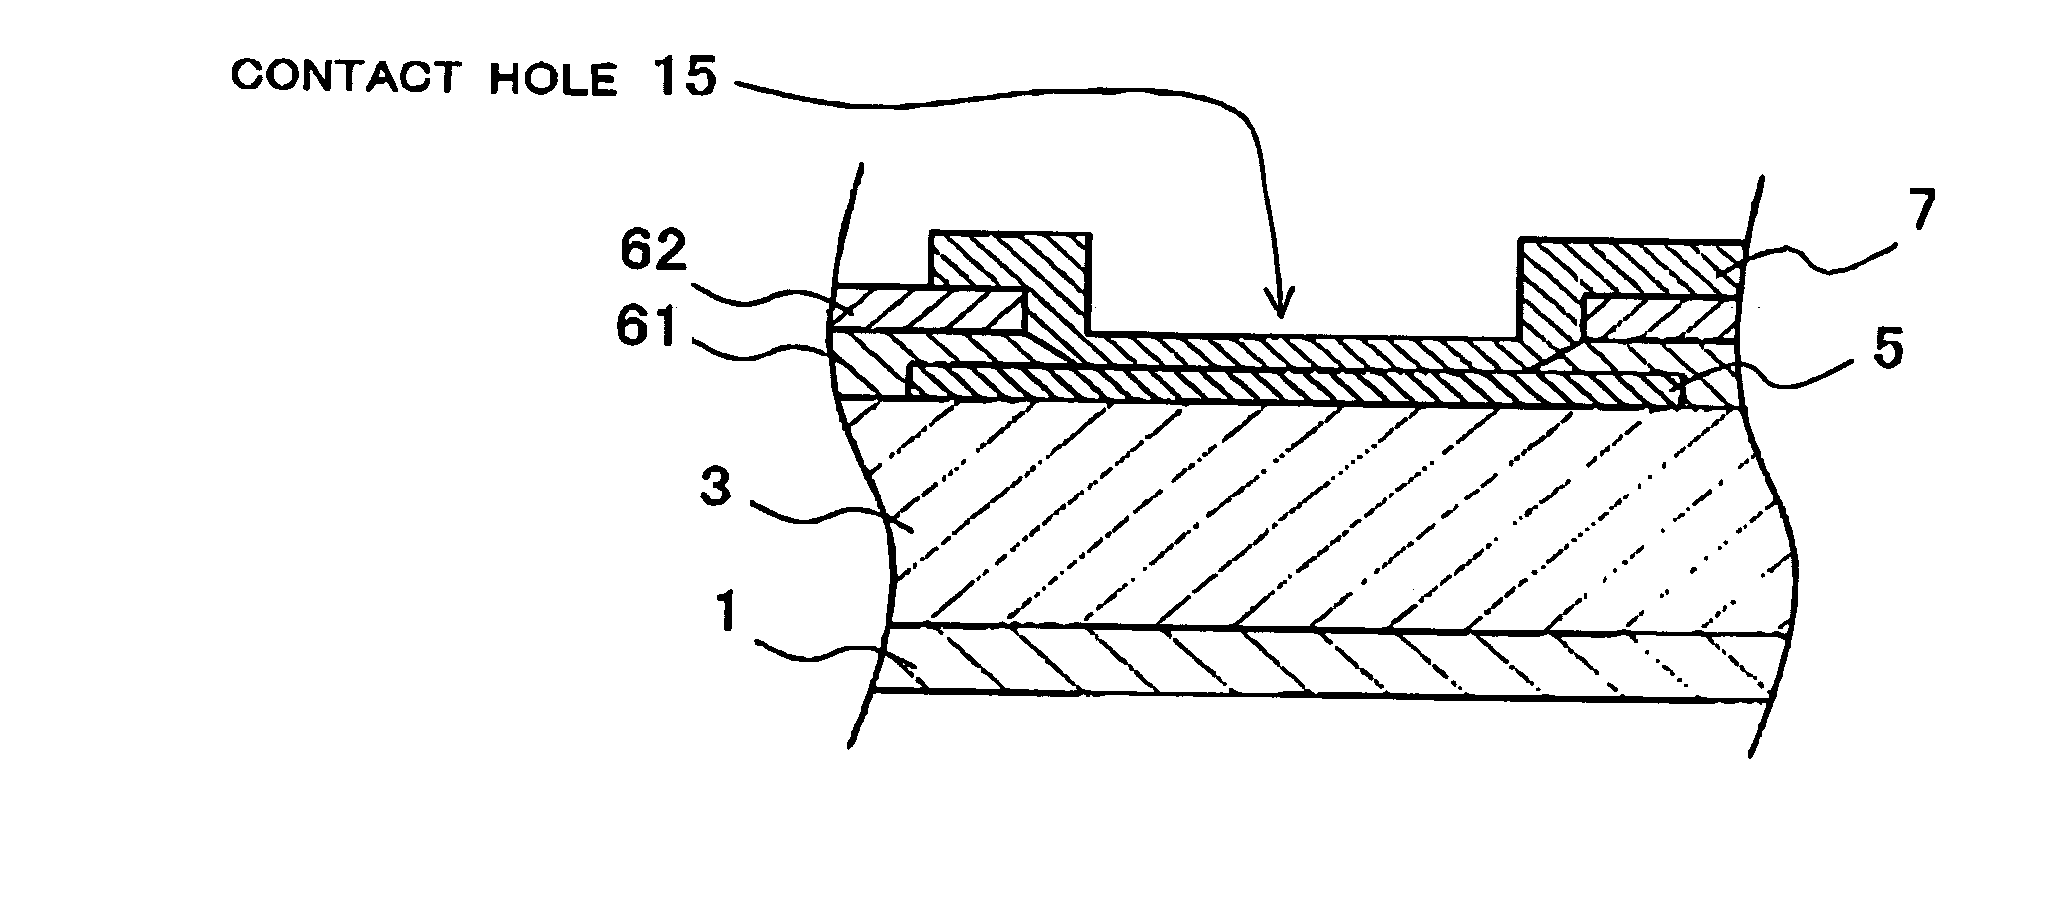 Thin-film transistor, TFT-array substrate, liquid-crystal display device and method of fabricating the same